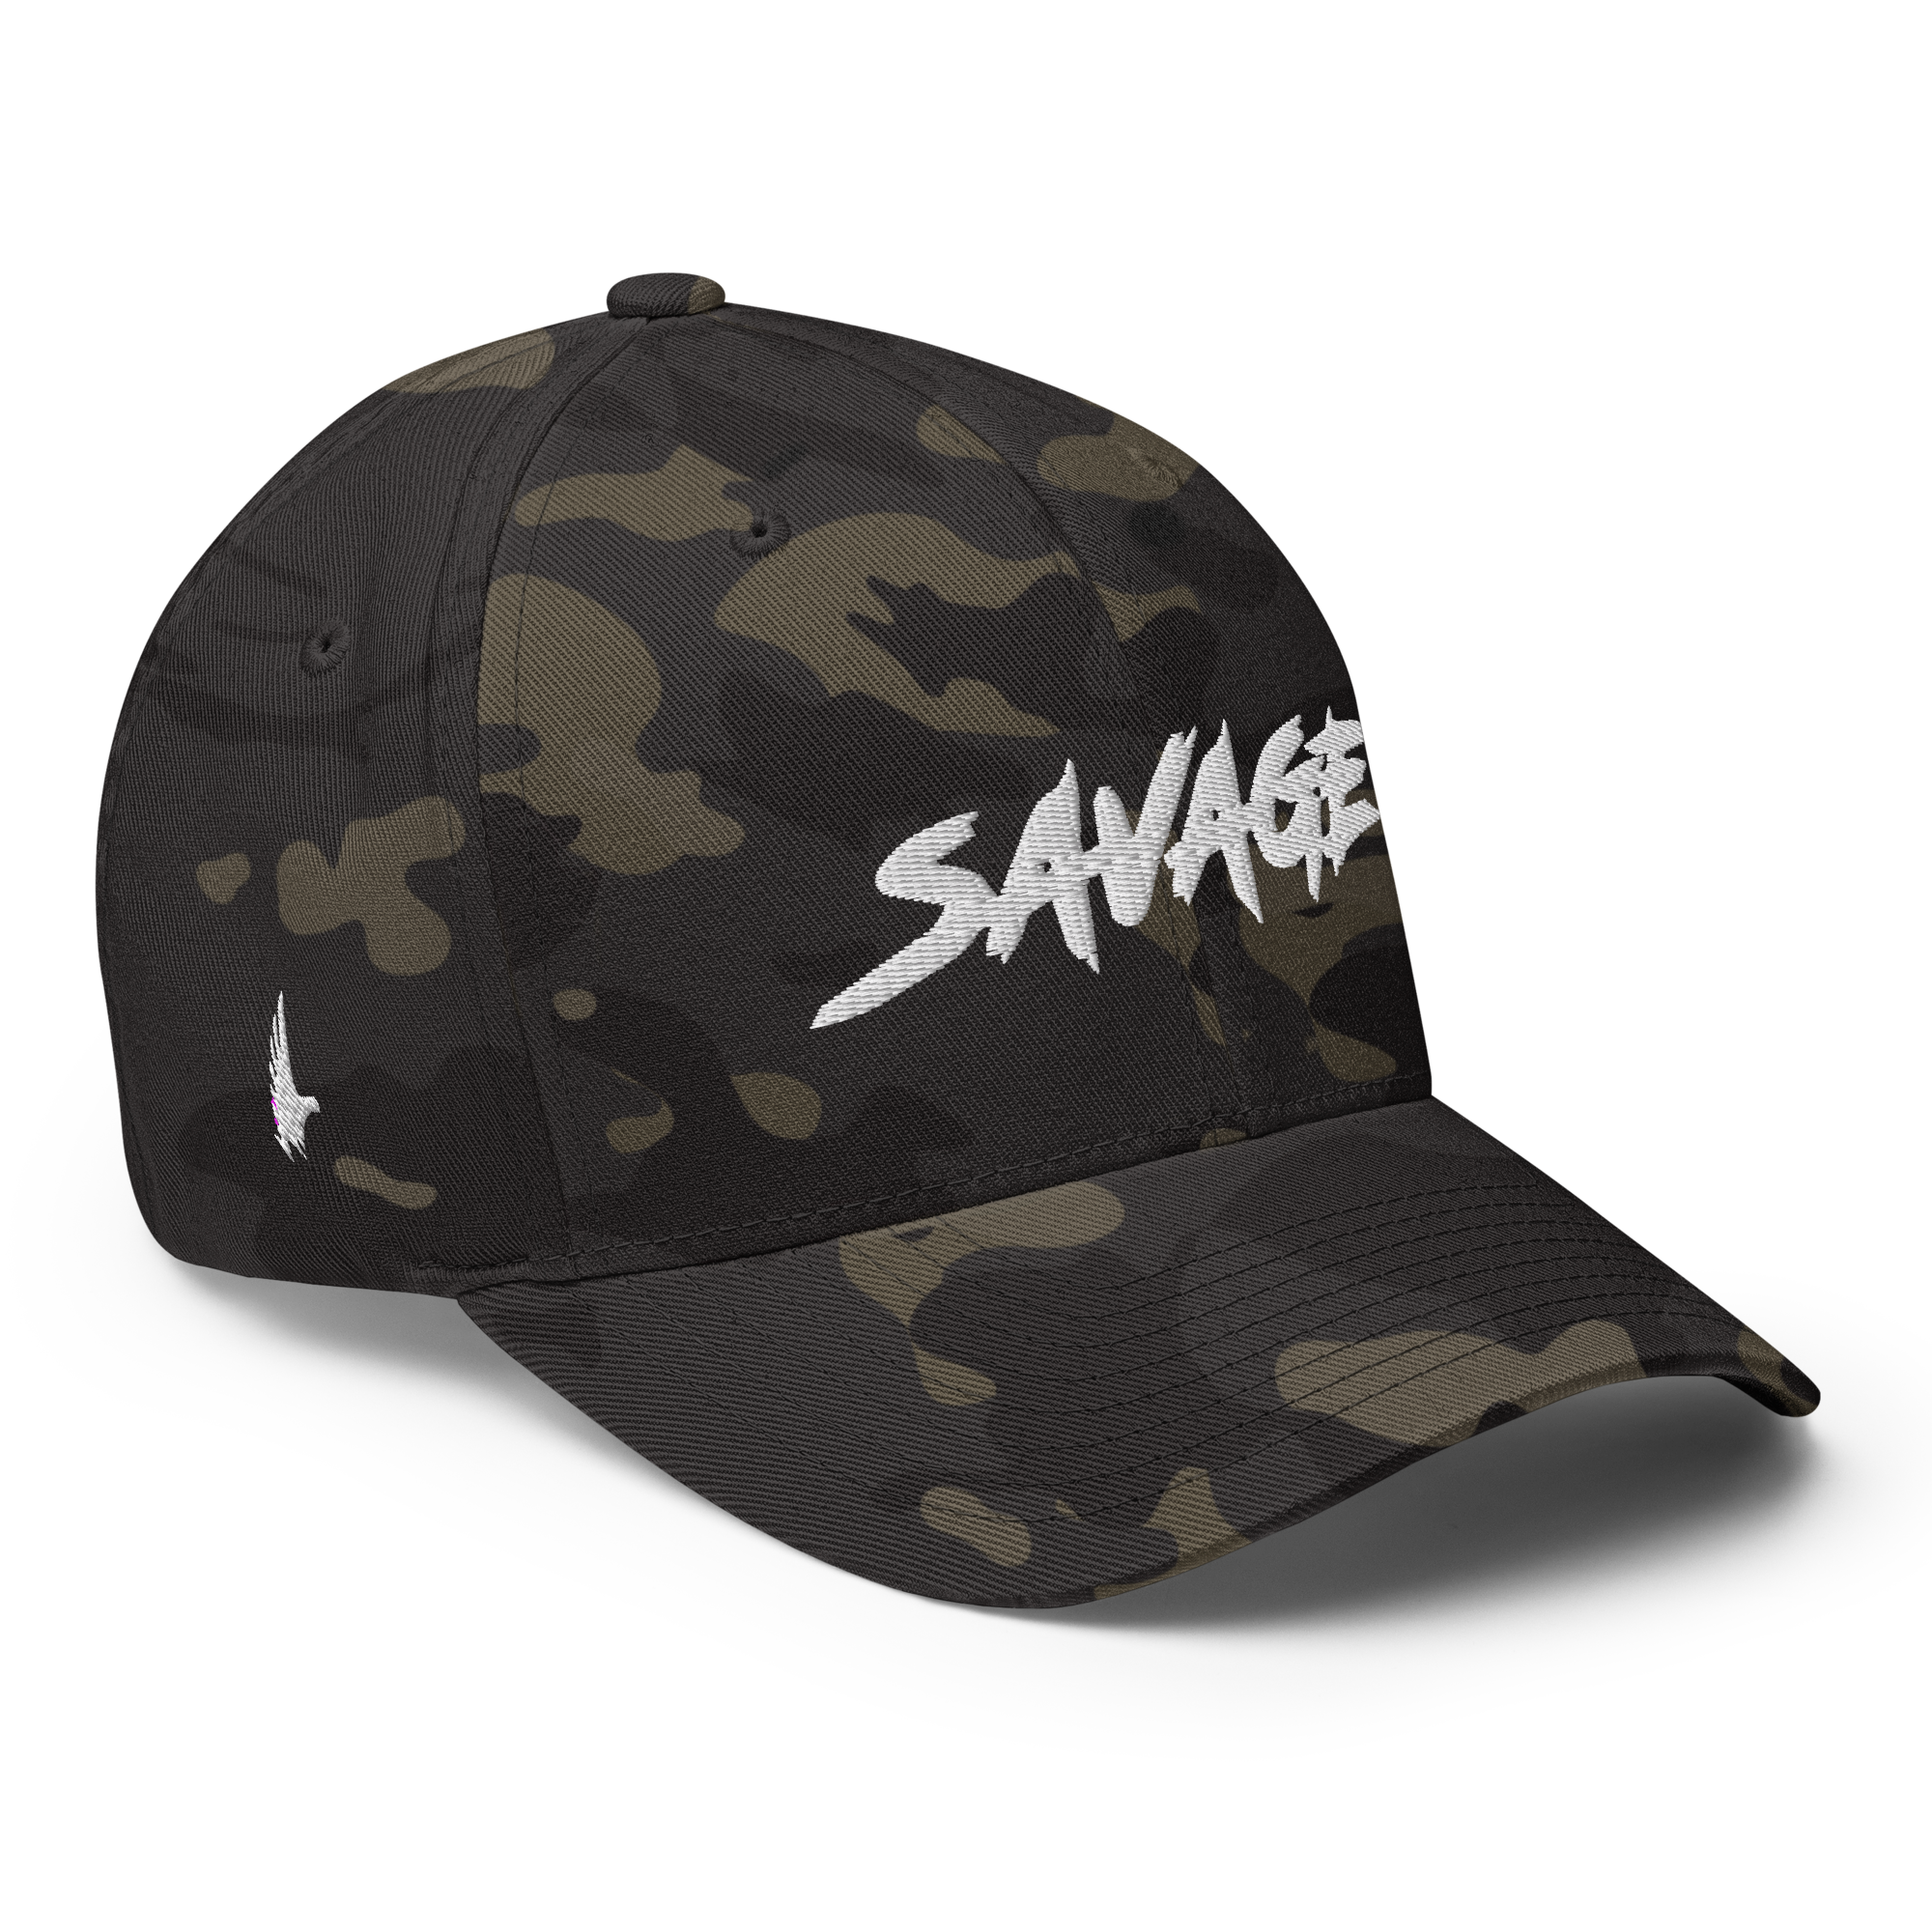 Savage Fitted Hat Urban Camo - Loyalty Vibes